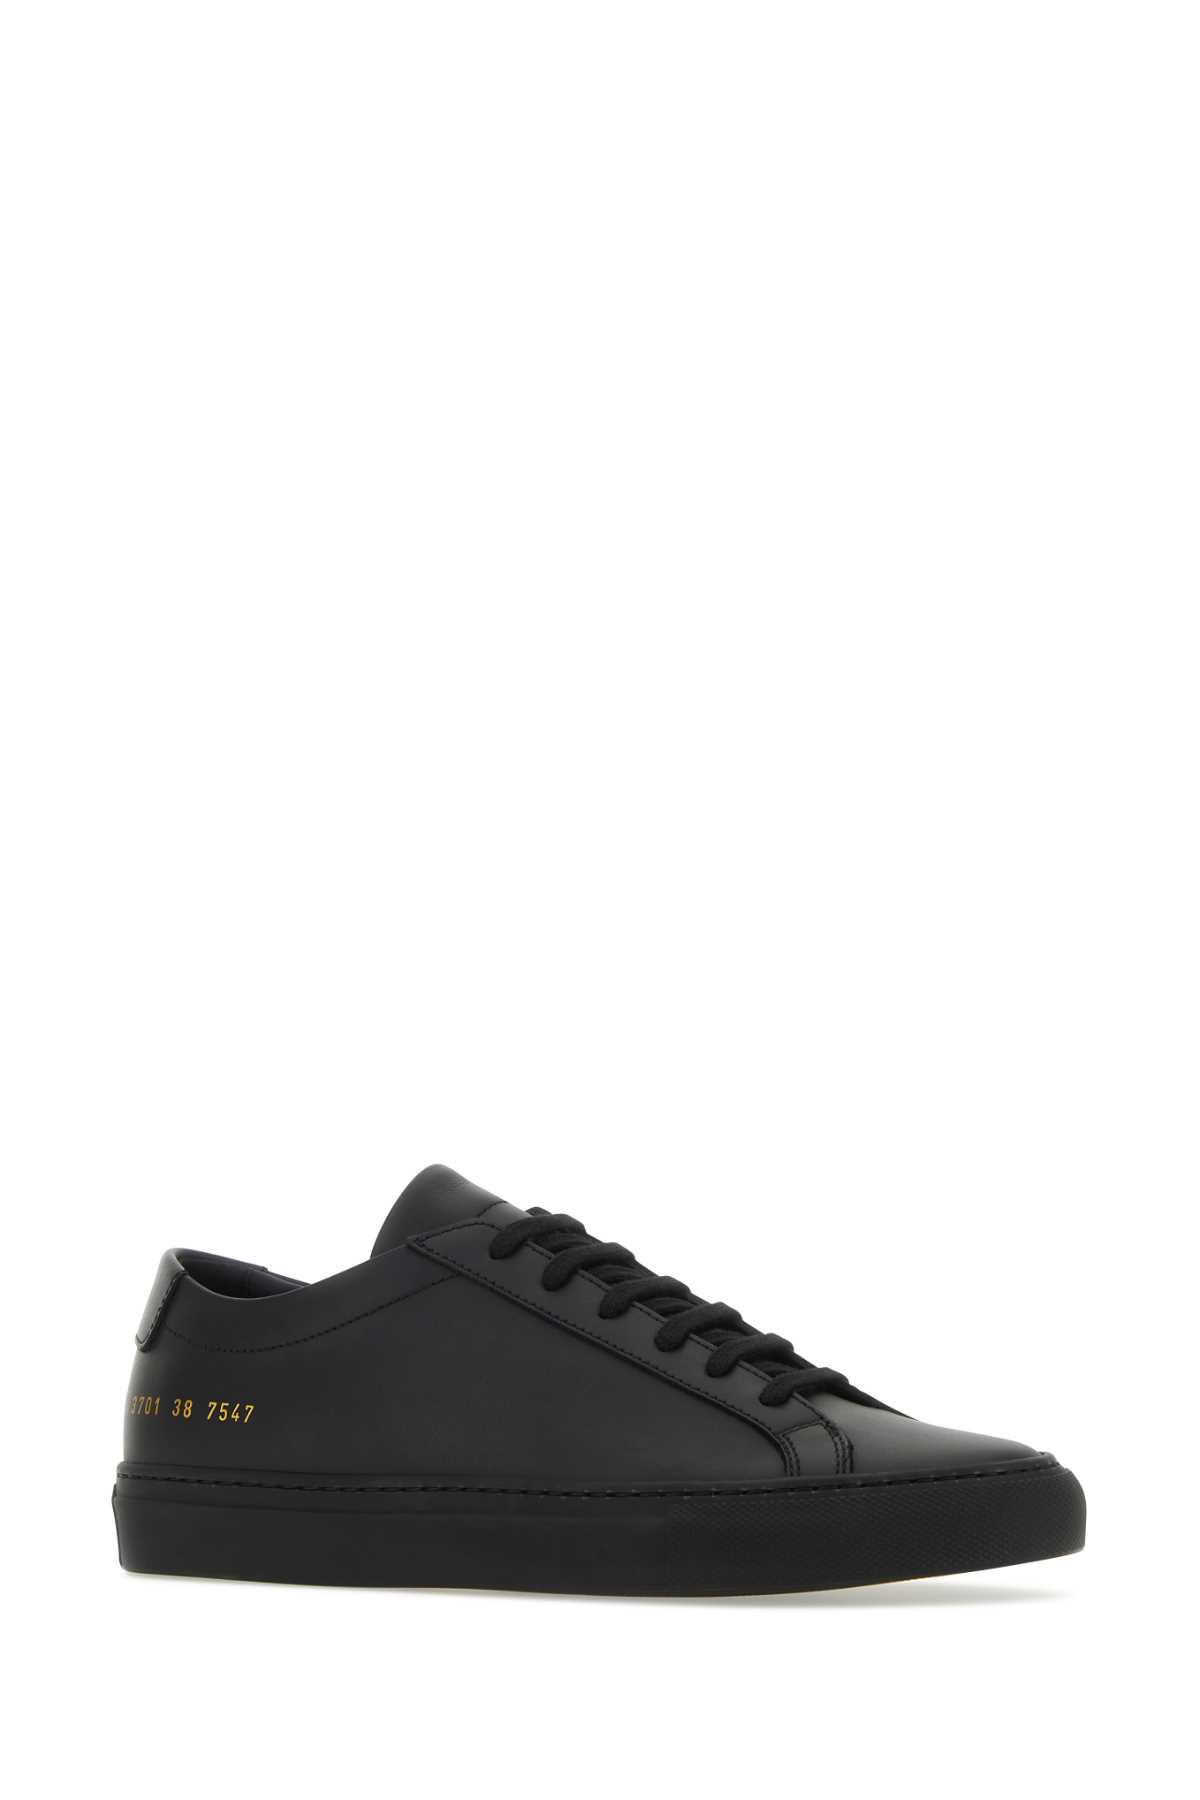 Common Projects Black Leather Original Achilles Sneakers In 7547